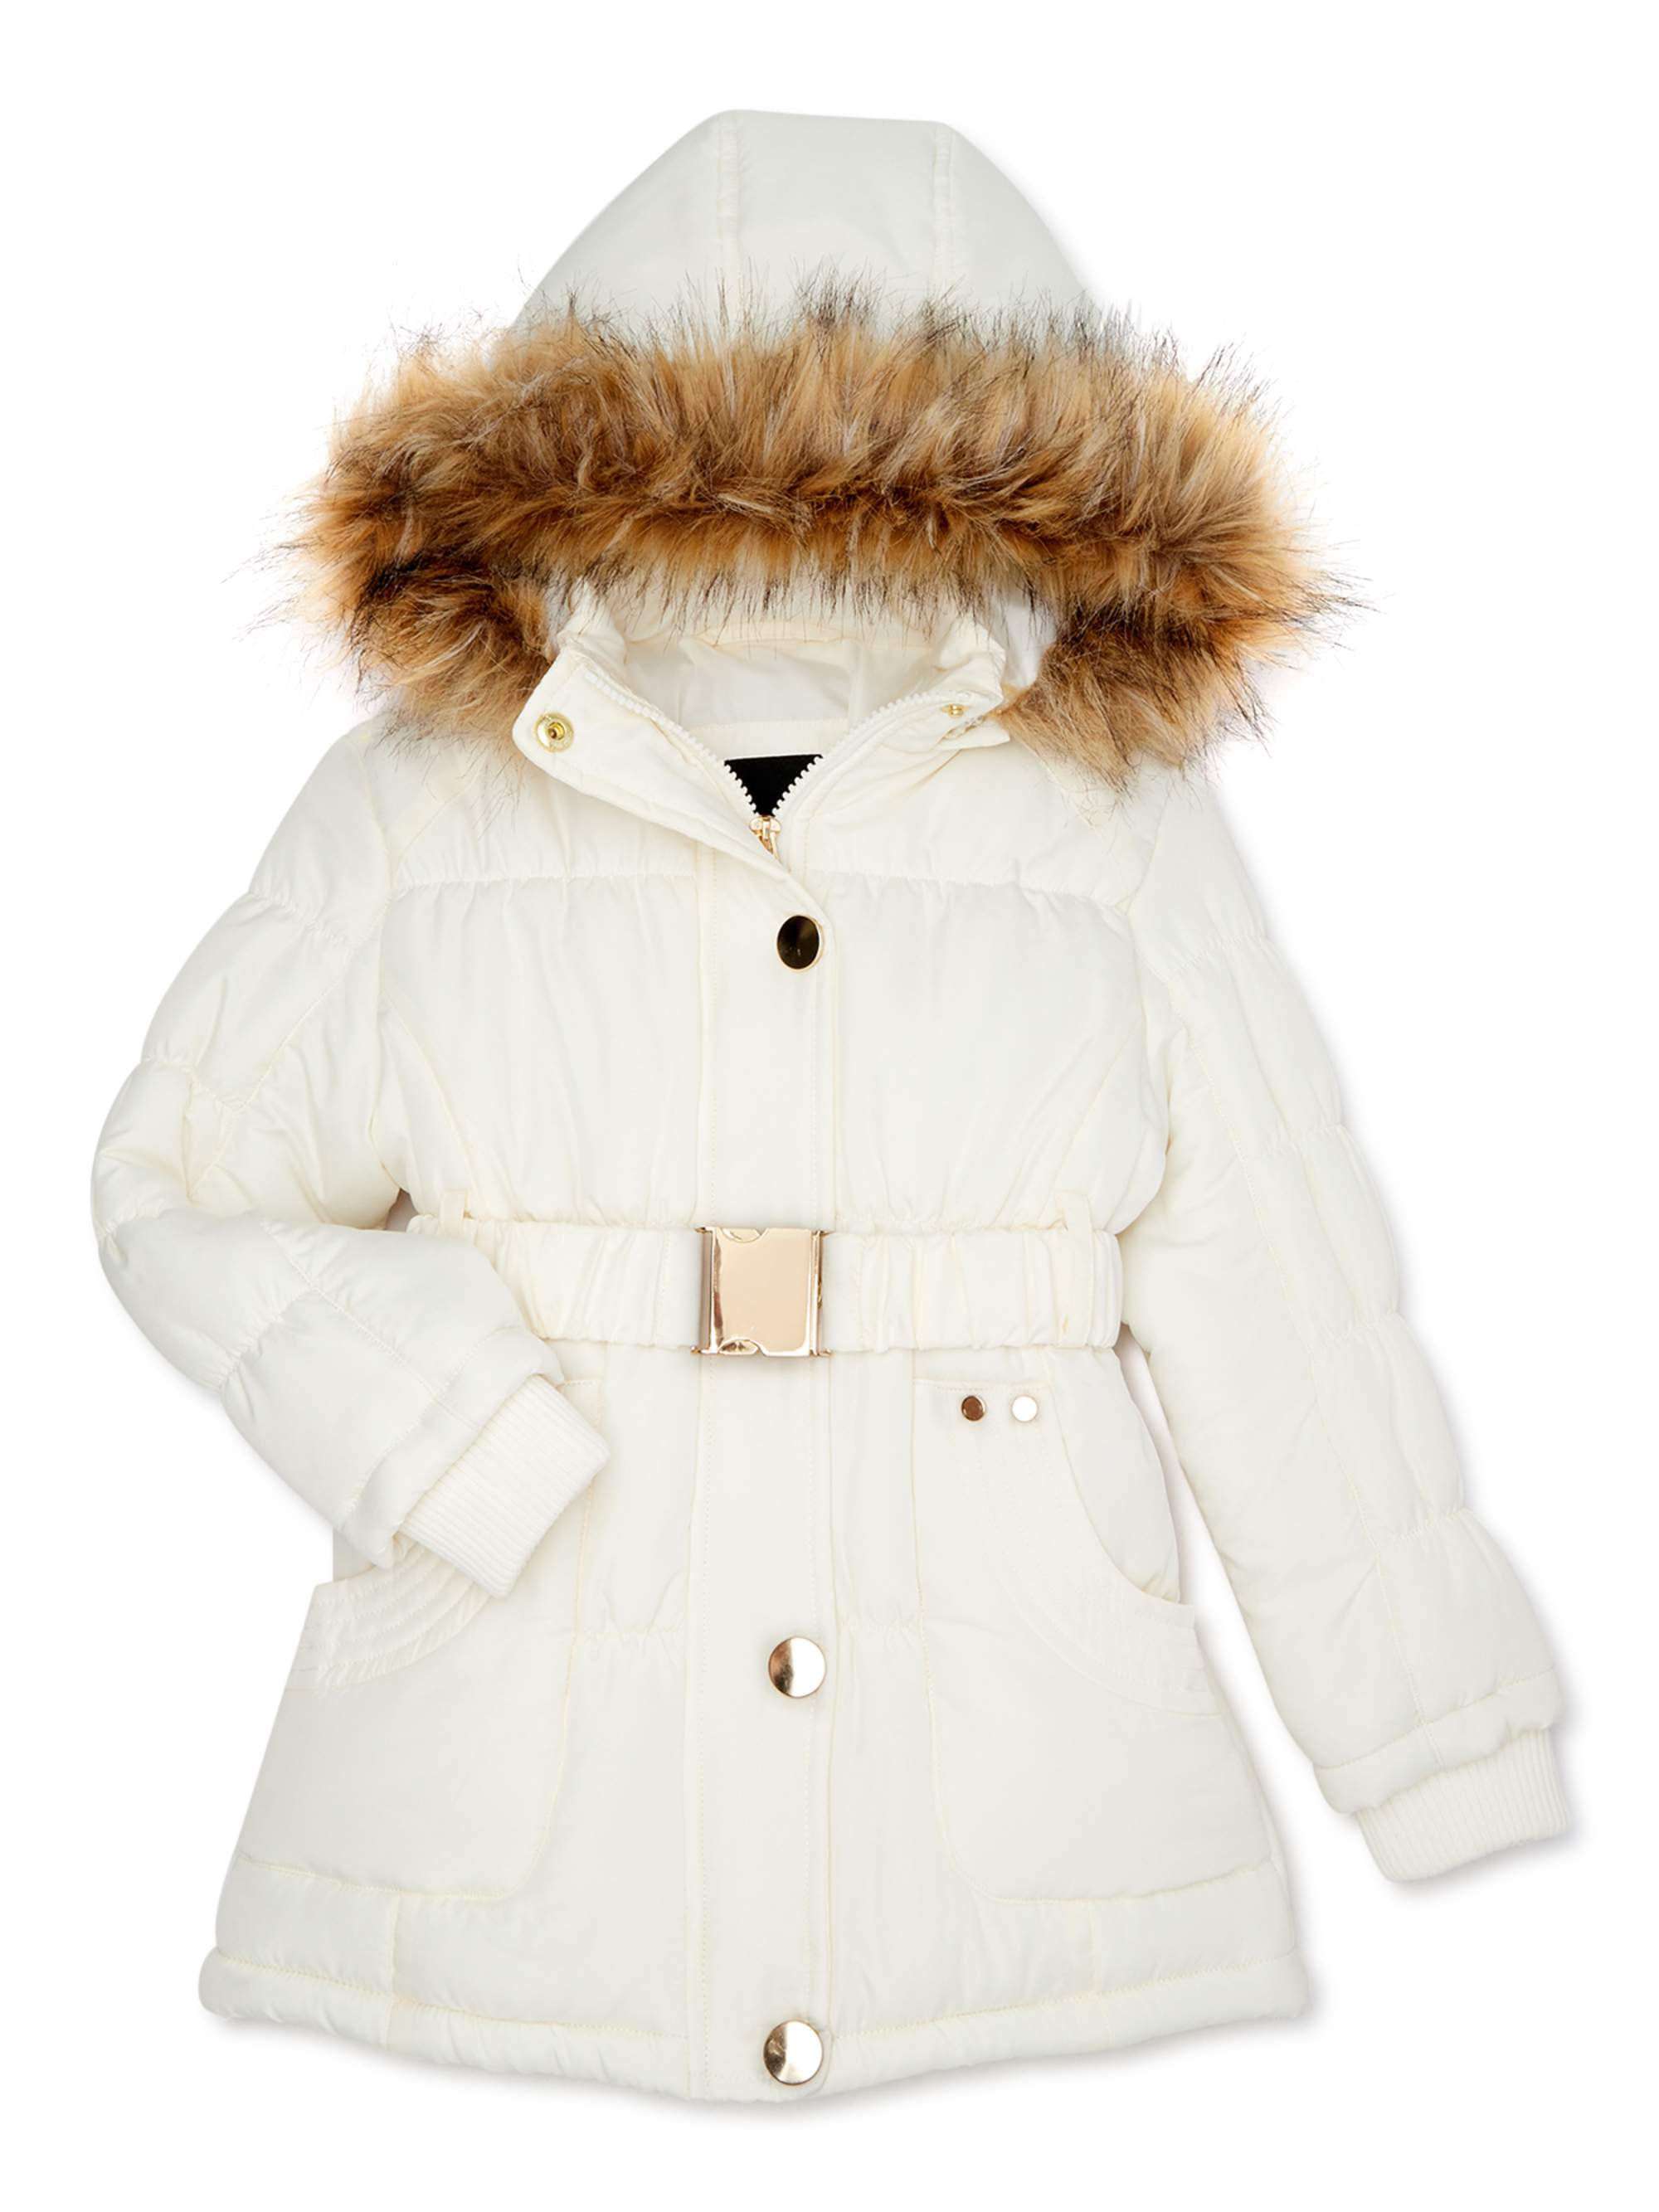 Bhip Girls Belted Puffer Jacket with Faux Fur Trimmed Hood, Sizes 4-12 ...